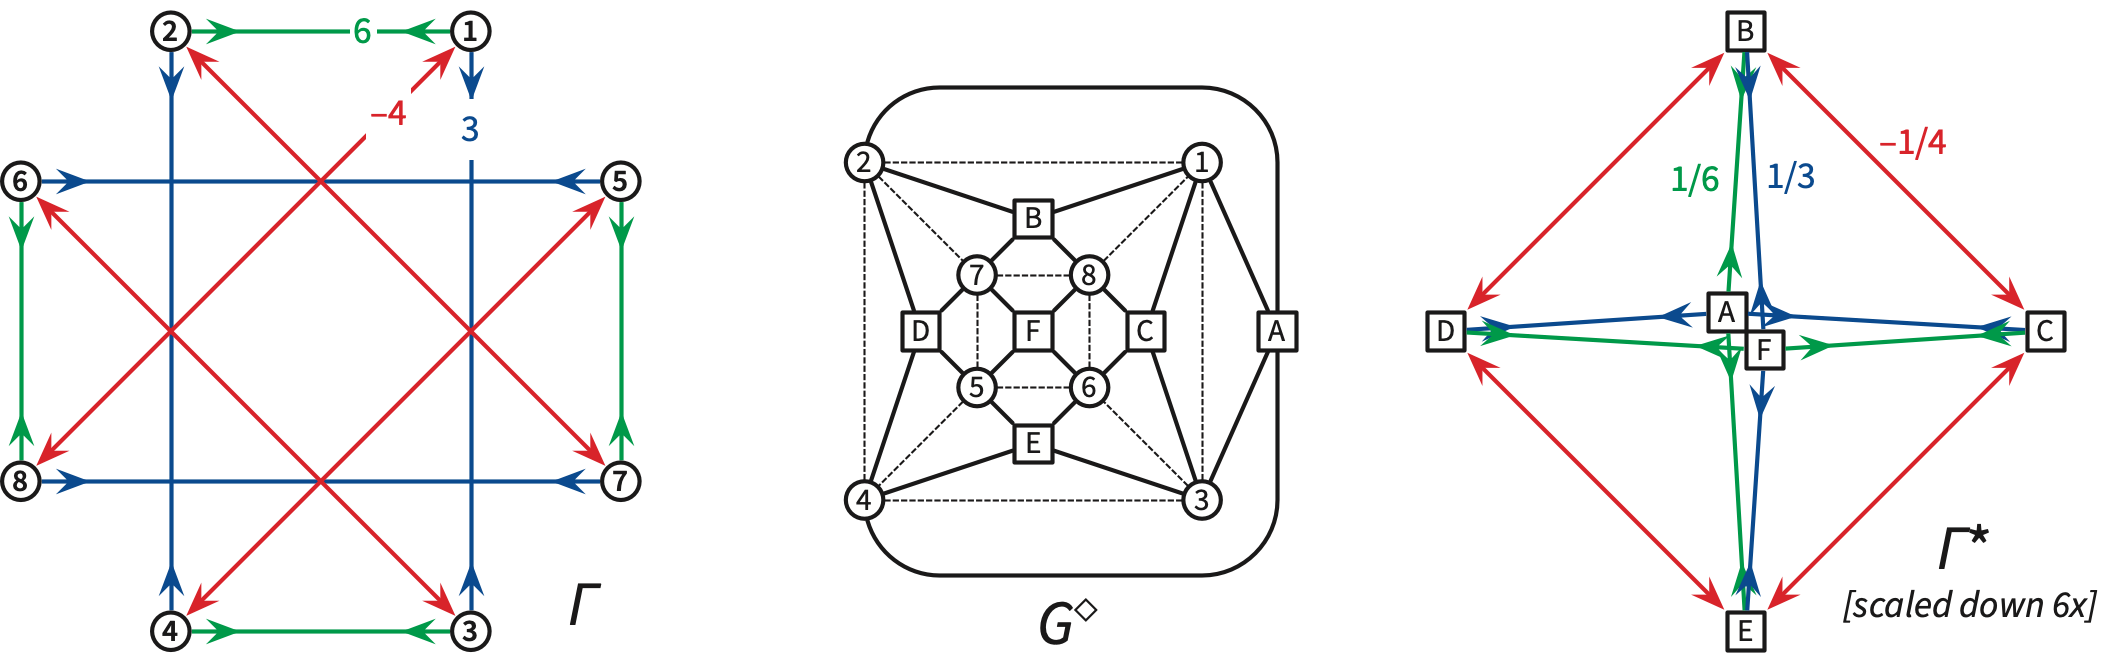 The anticube framework with an equilibrium stress, the radial map of the cube, and the corresponding reciprocal framework.